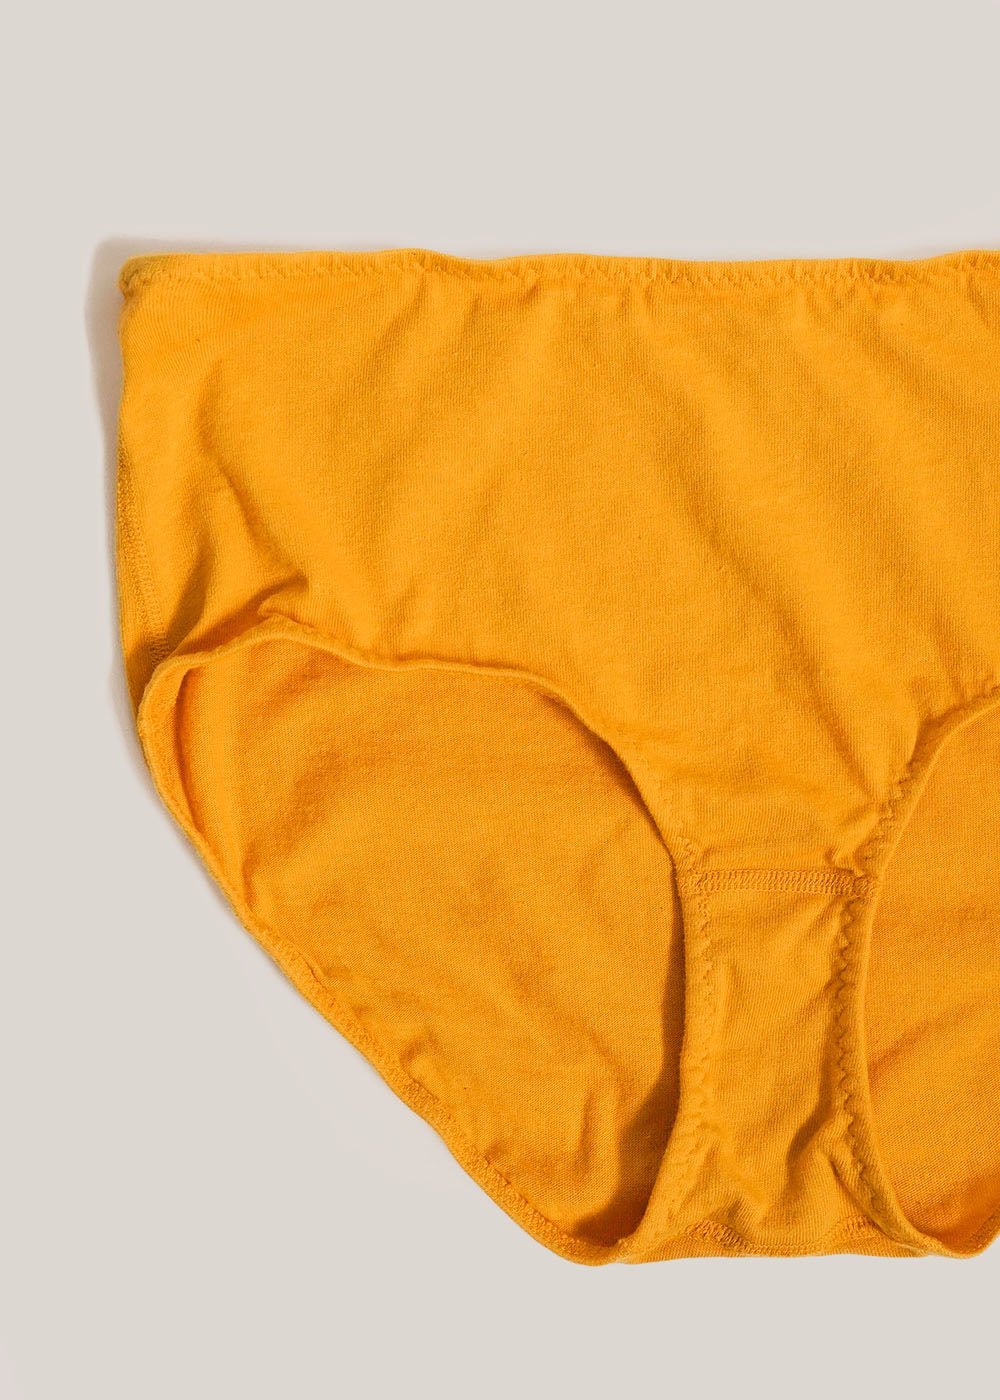 Pansy Sunflower High Rise Underwear - New Classics Studios Sustainable Ethical Fashion Canada